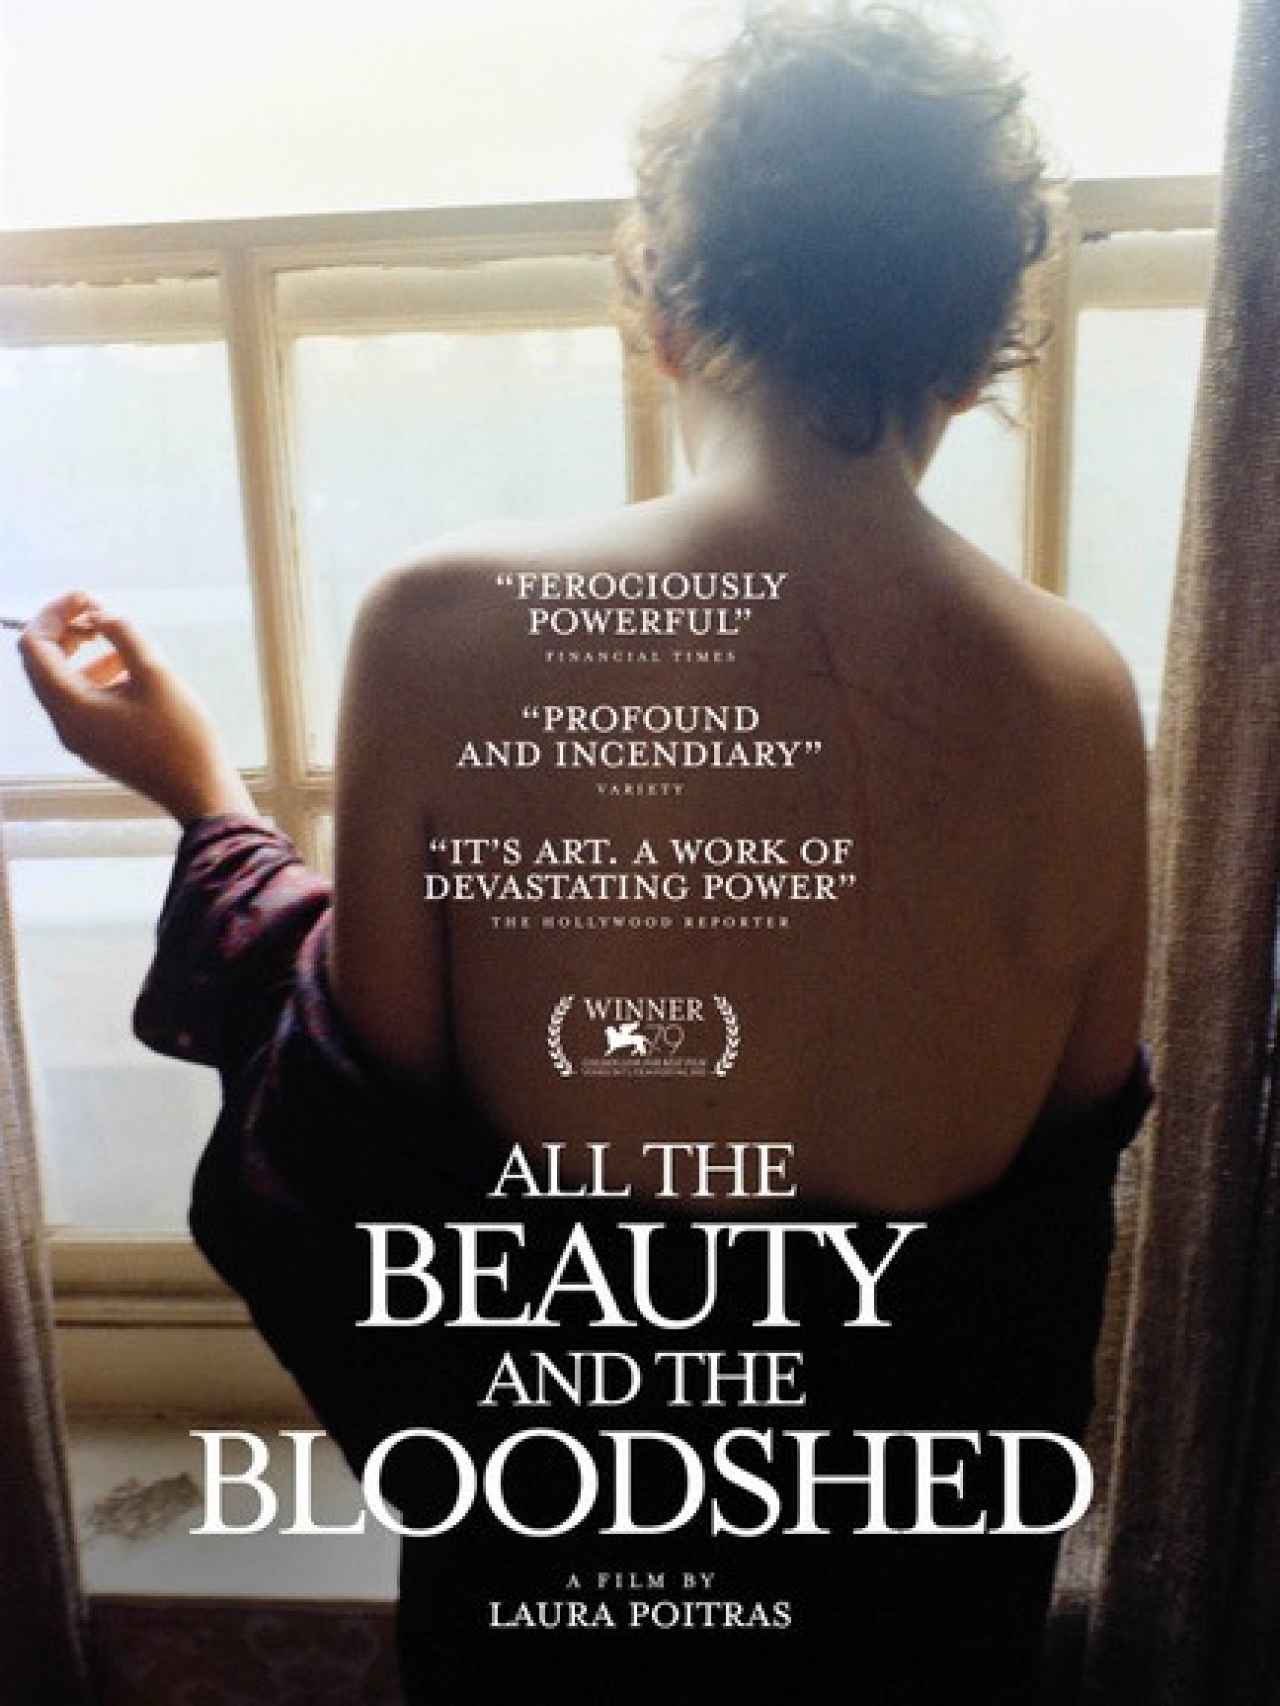 Cartel de 'All the Beauty and the Bloodshed'.